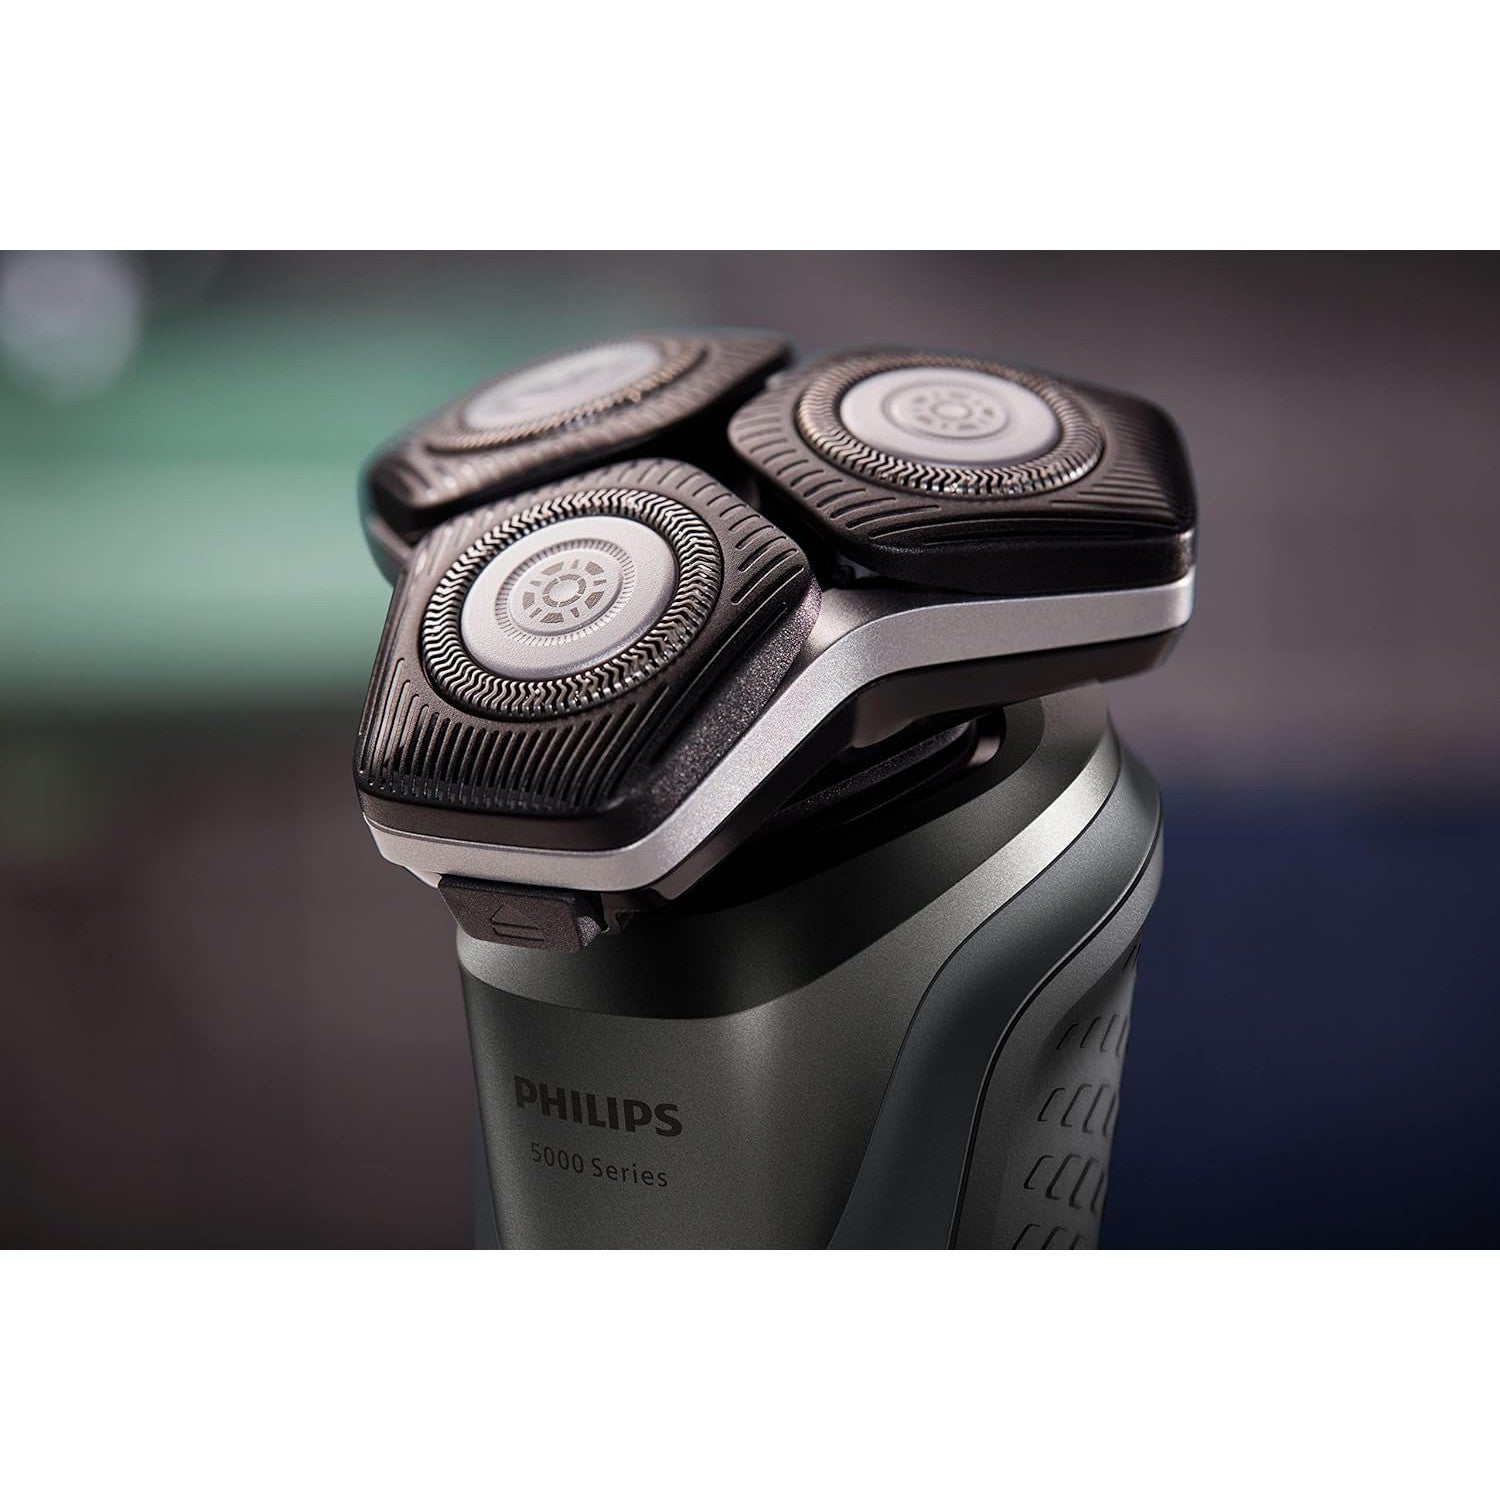 Philips 5000 Series  S5887/10 Wet And Dry Electric Shaver with advanced SkinIQ technology